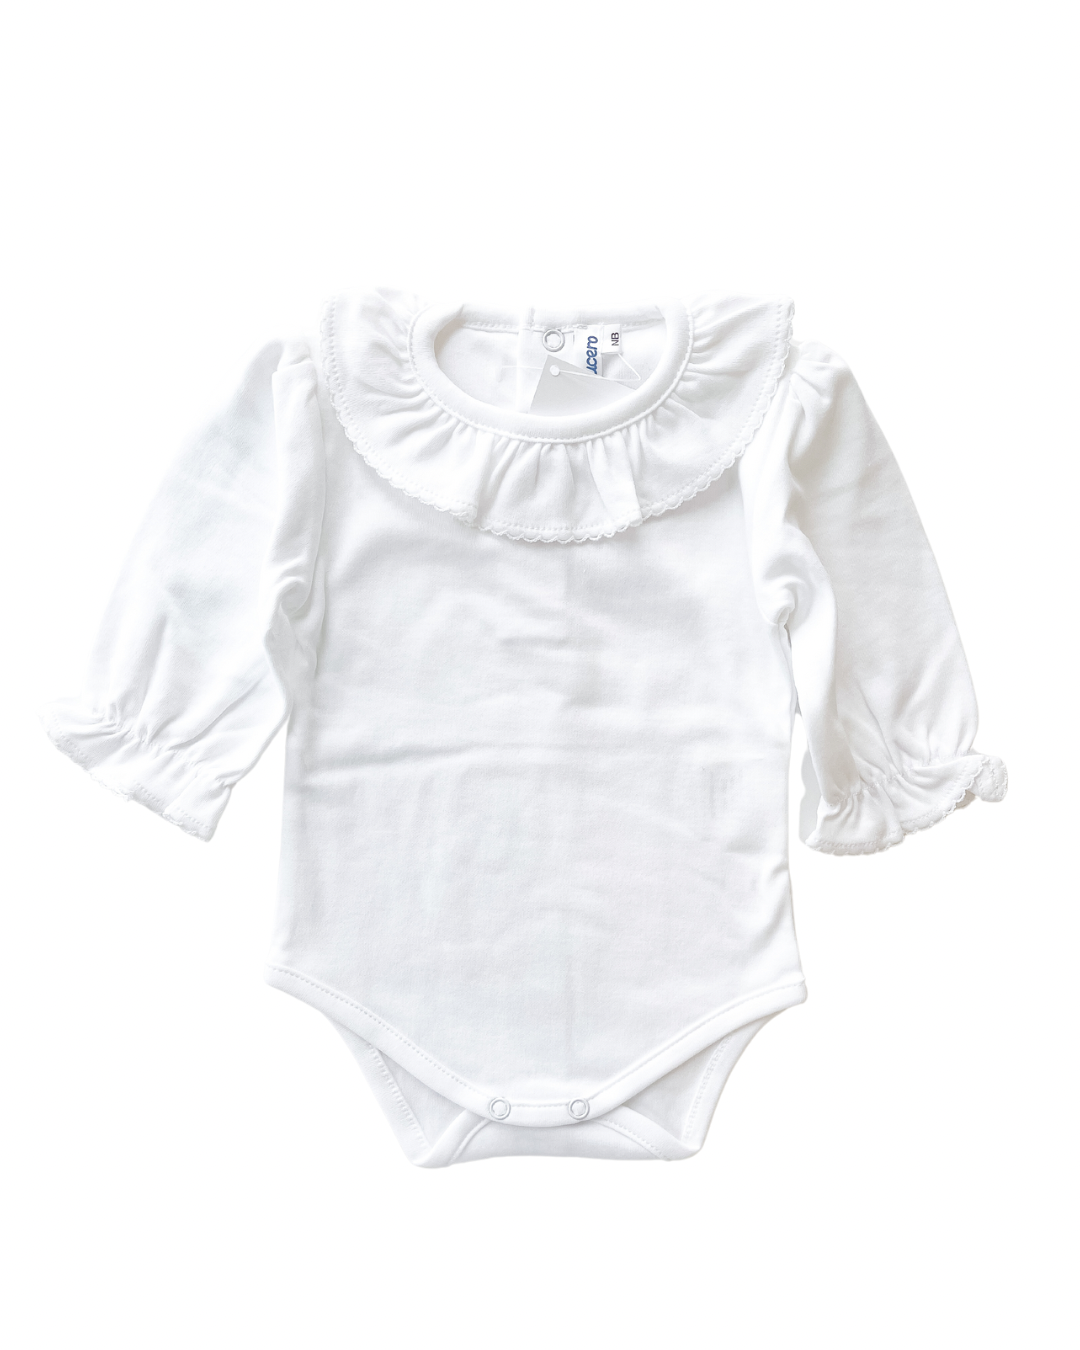 Long Sleeve Bodysuit Top with Ruffled Collar, for Babies - white